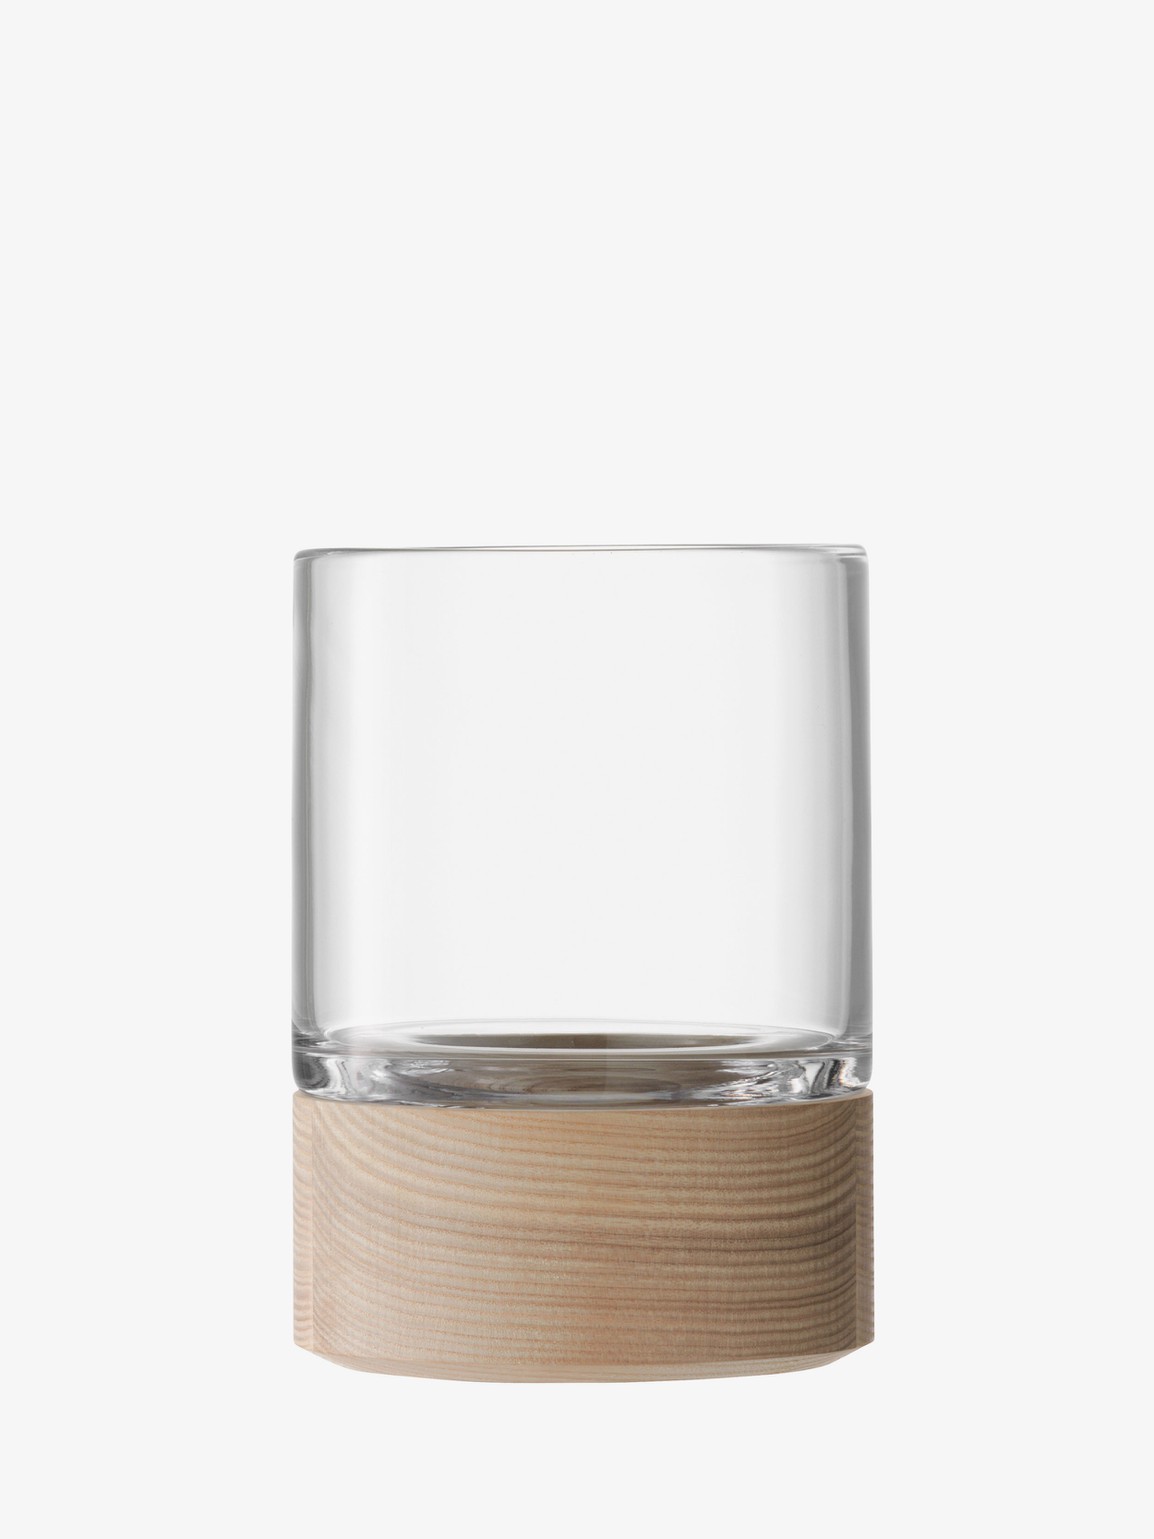 A gently tapered, mouth-blown tealight holder with thick base.